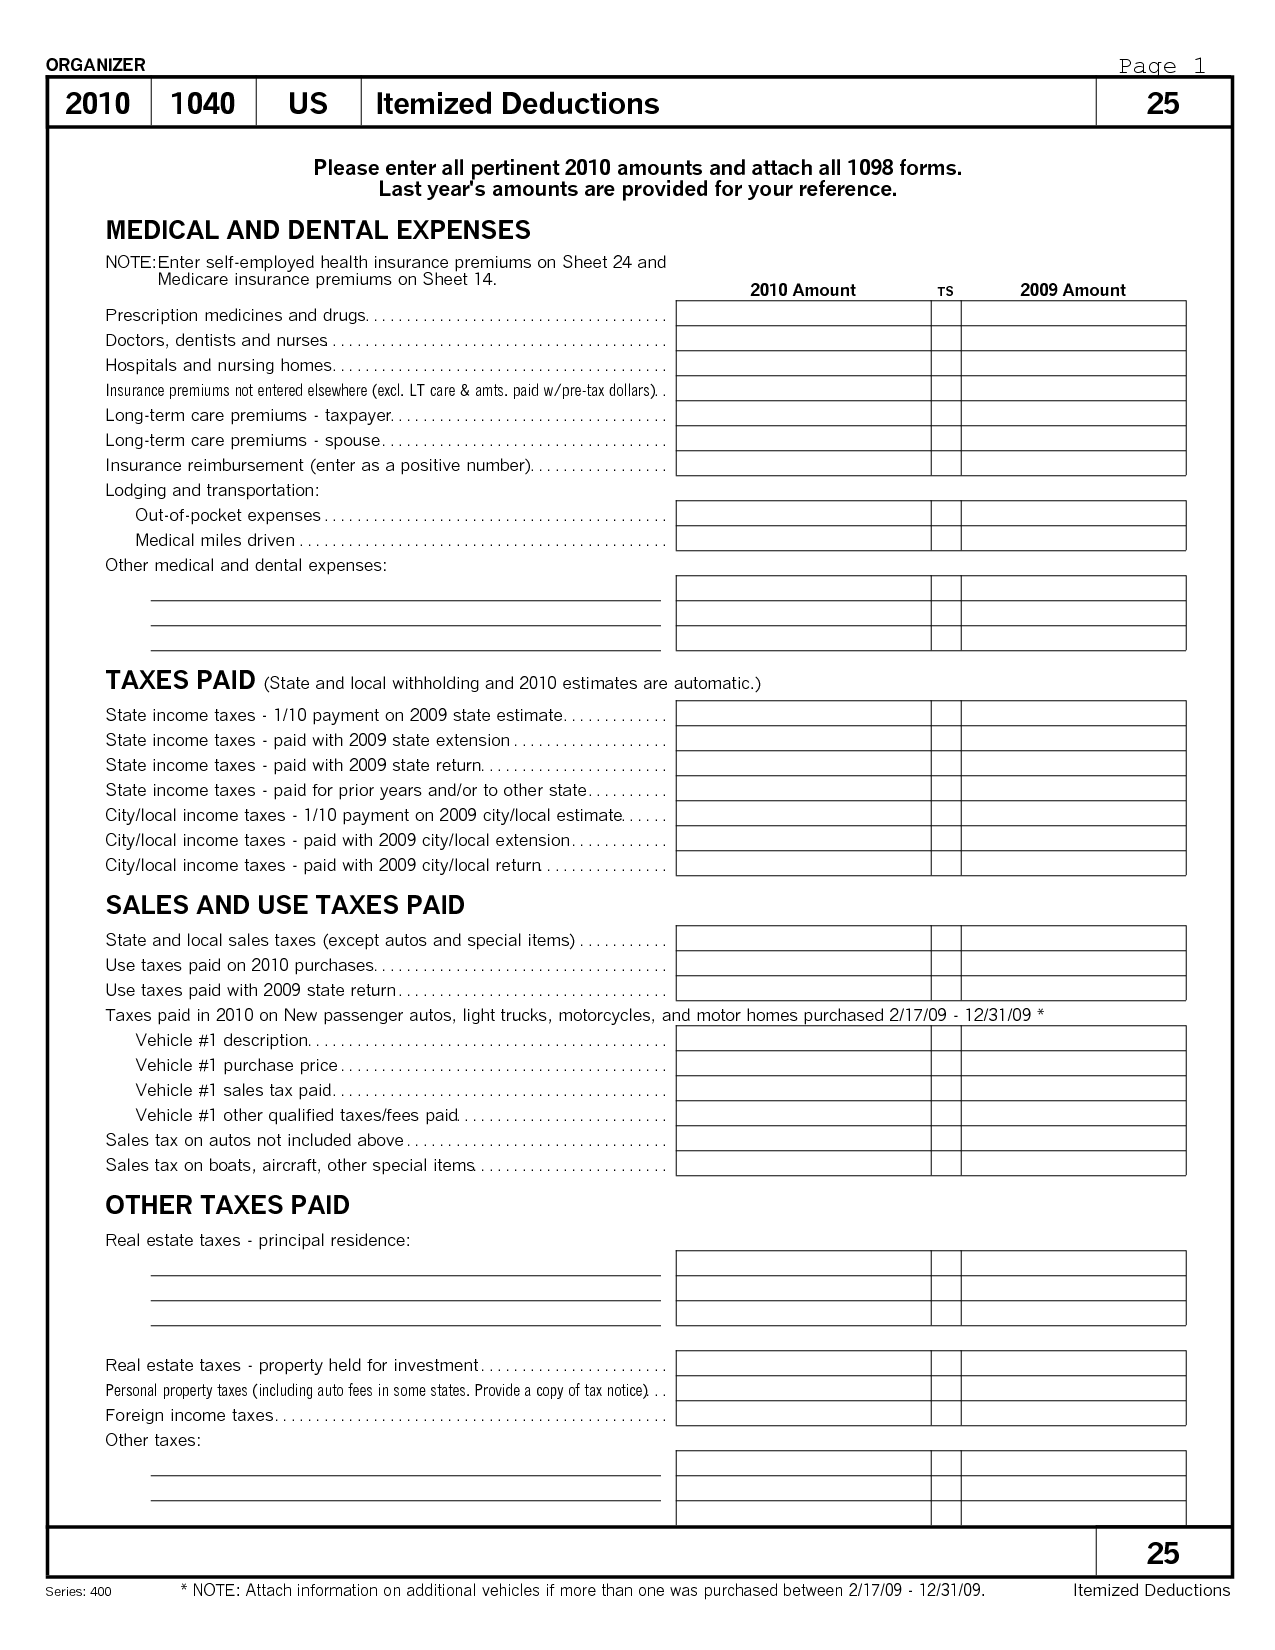 8 Best Images of Monthly Bill Worksheet  2015 Itemized Tax Deduction Worksheet Printable, Free 